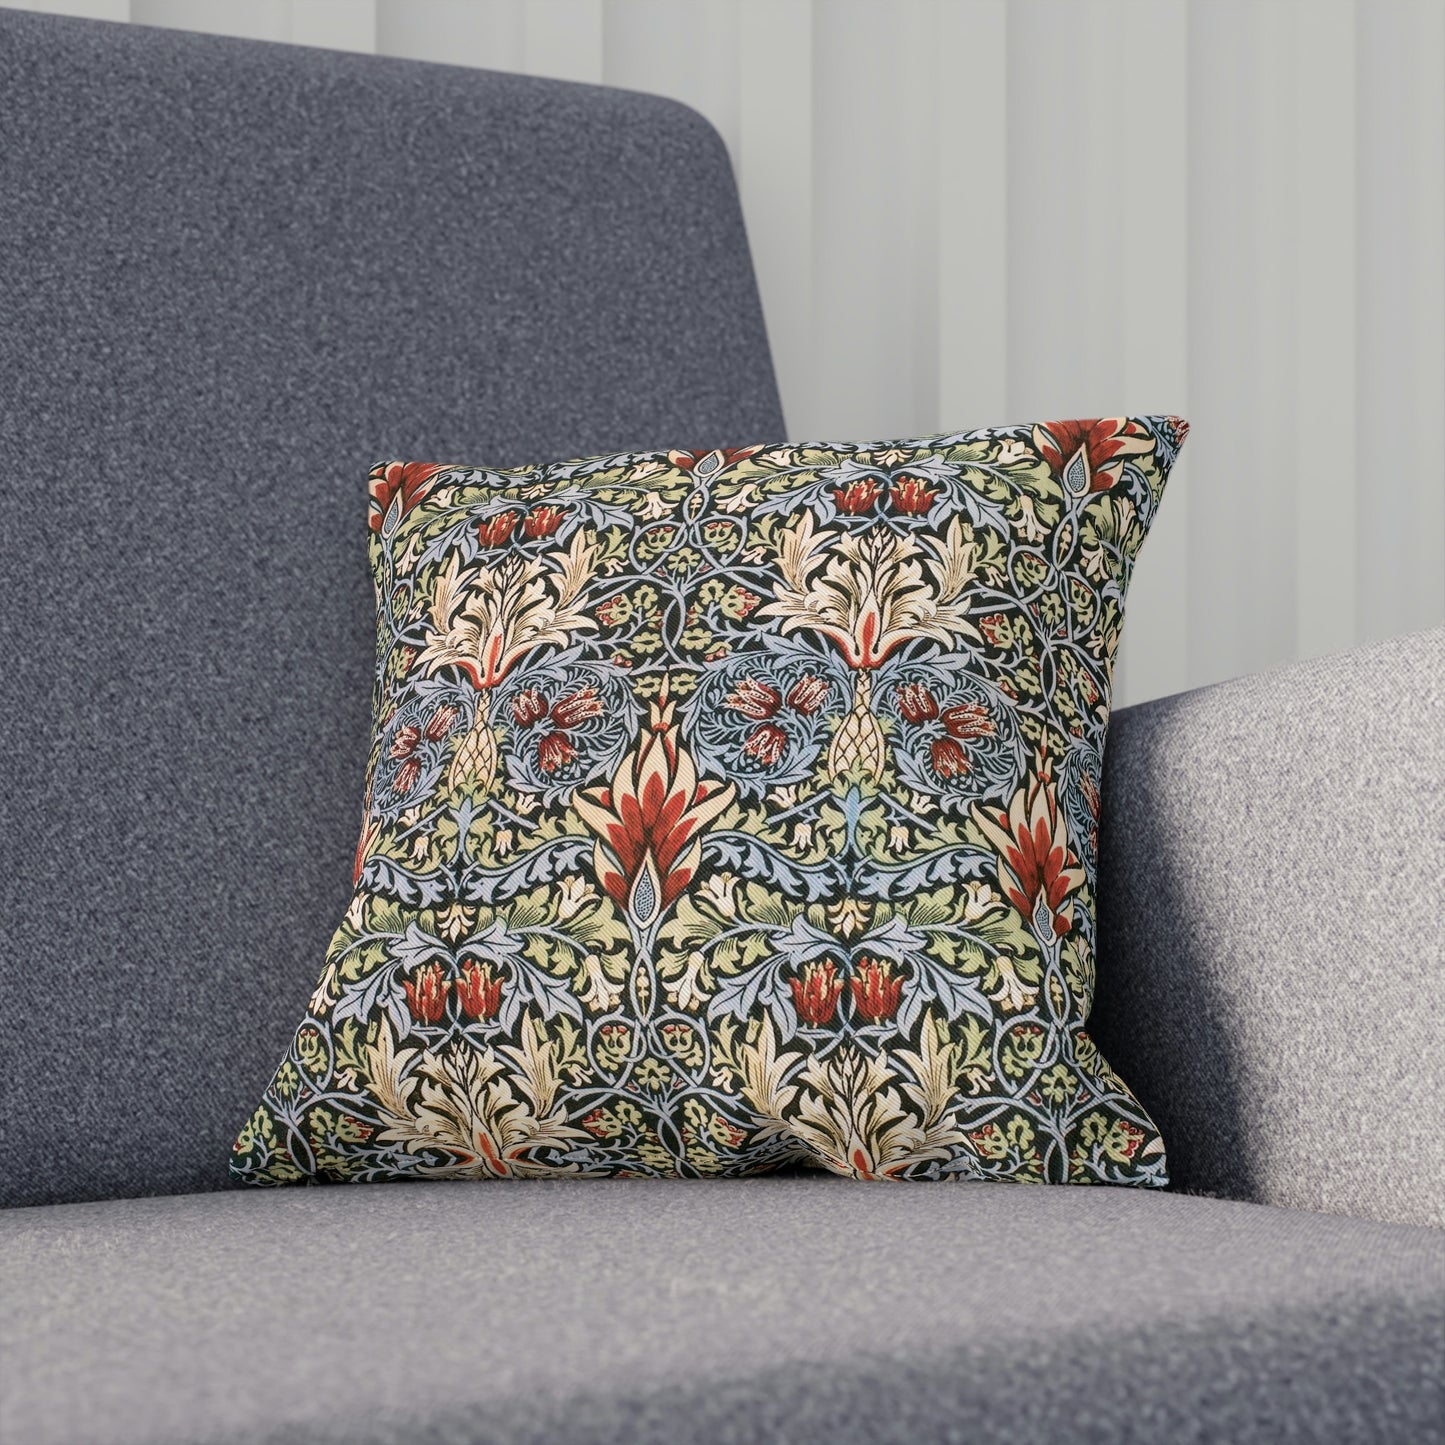 William-Morris-and-Co-Cushion-and-Cushion-Cover-Snakeshead-Collection-5